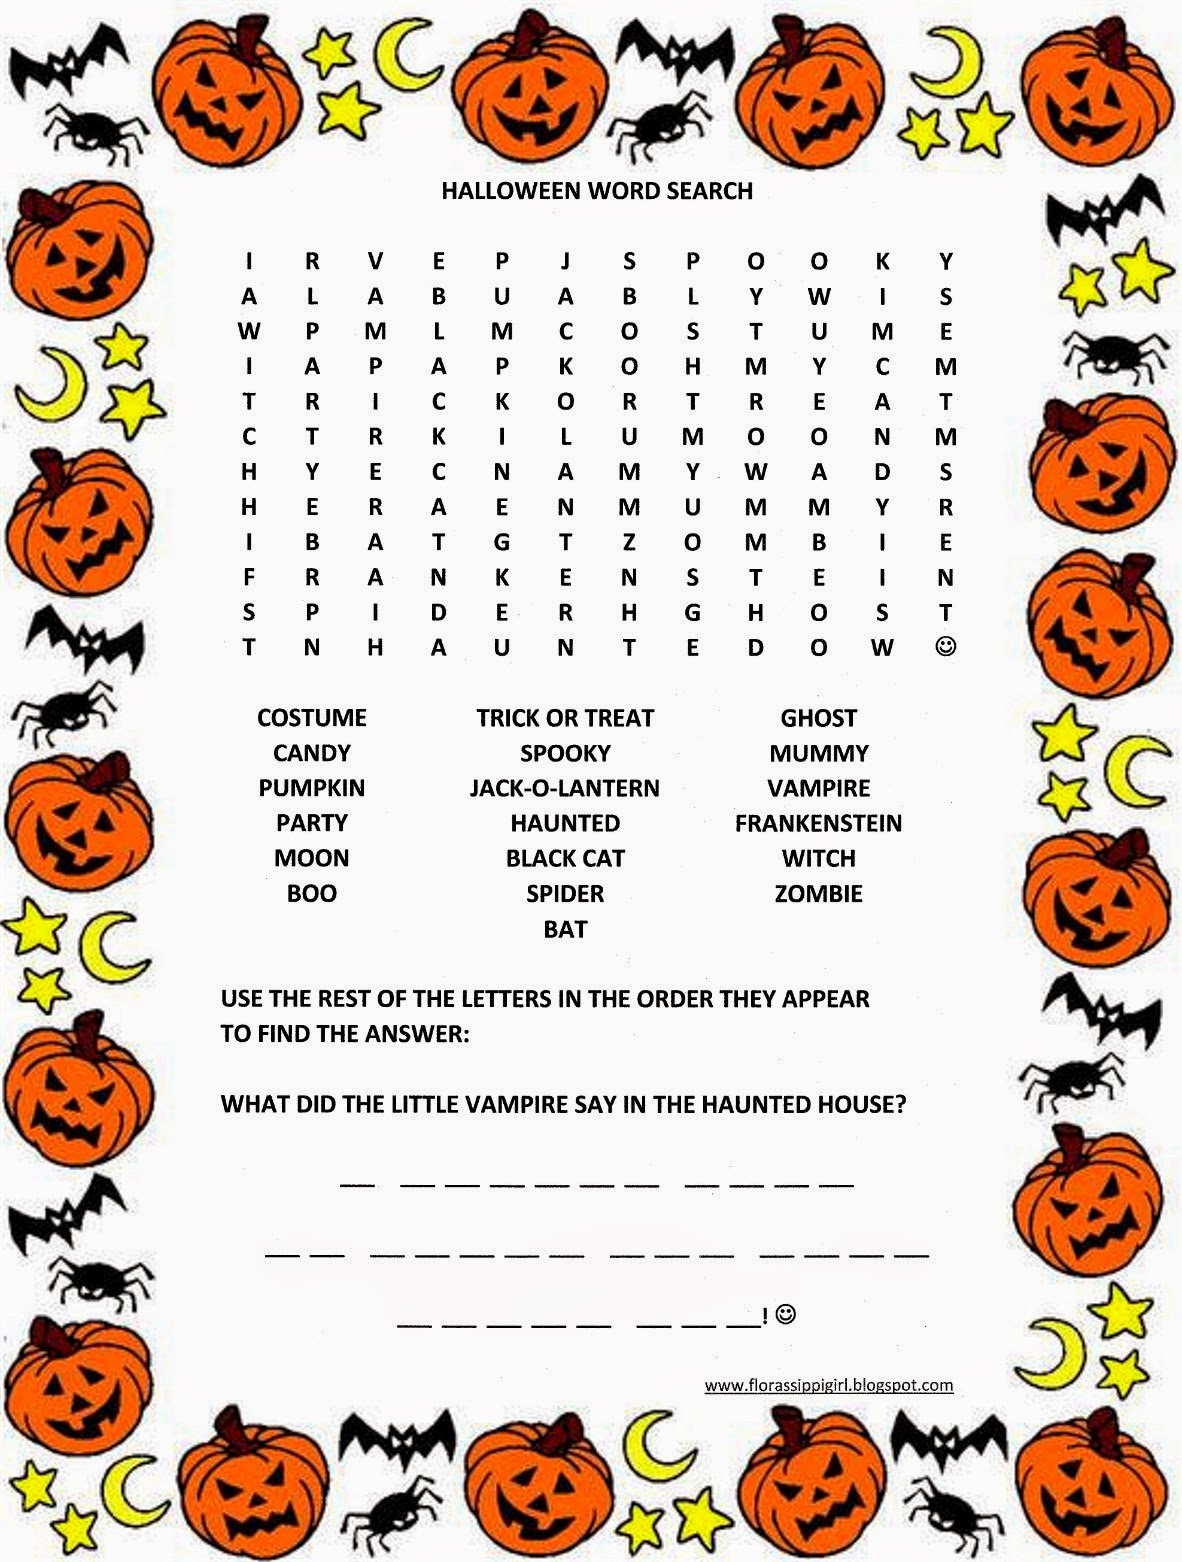 florassippi-girl-halloween-word-search-free-printable